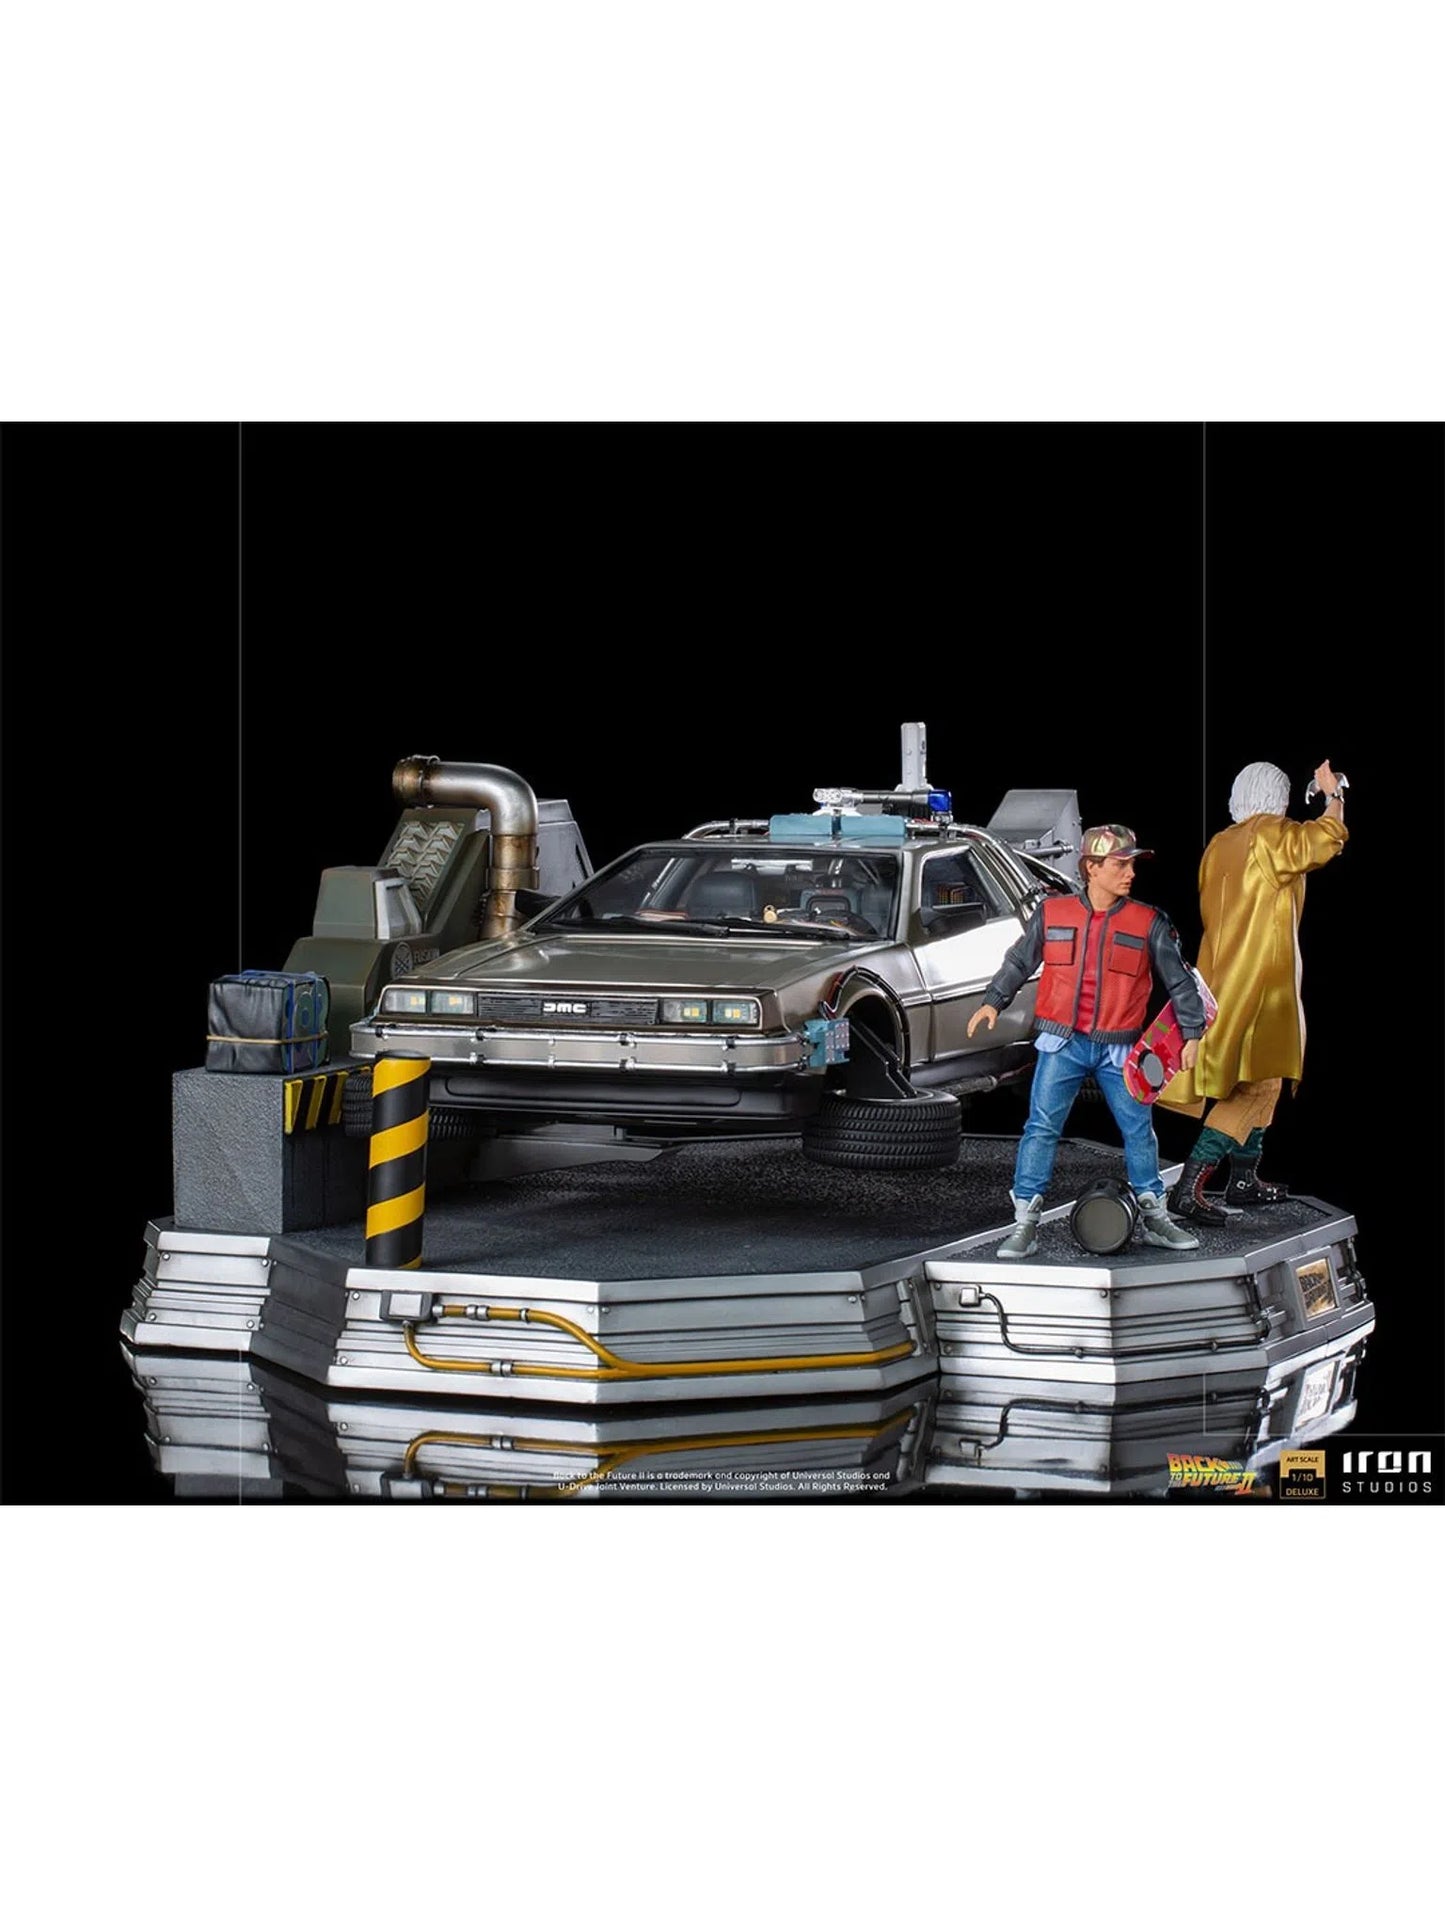 IRON STUDIOS DELOREAN FULL SET DELUXE ‚ BACK TO THE FUTURE PART II ART SCALE 1/10 -  UNBTTF51021-10 - Anotoys Collectibles